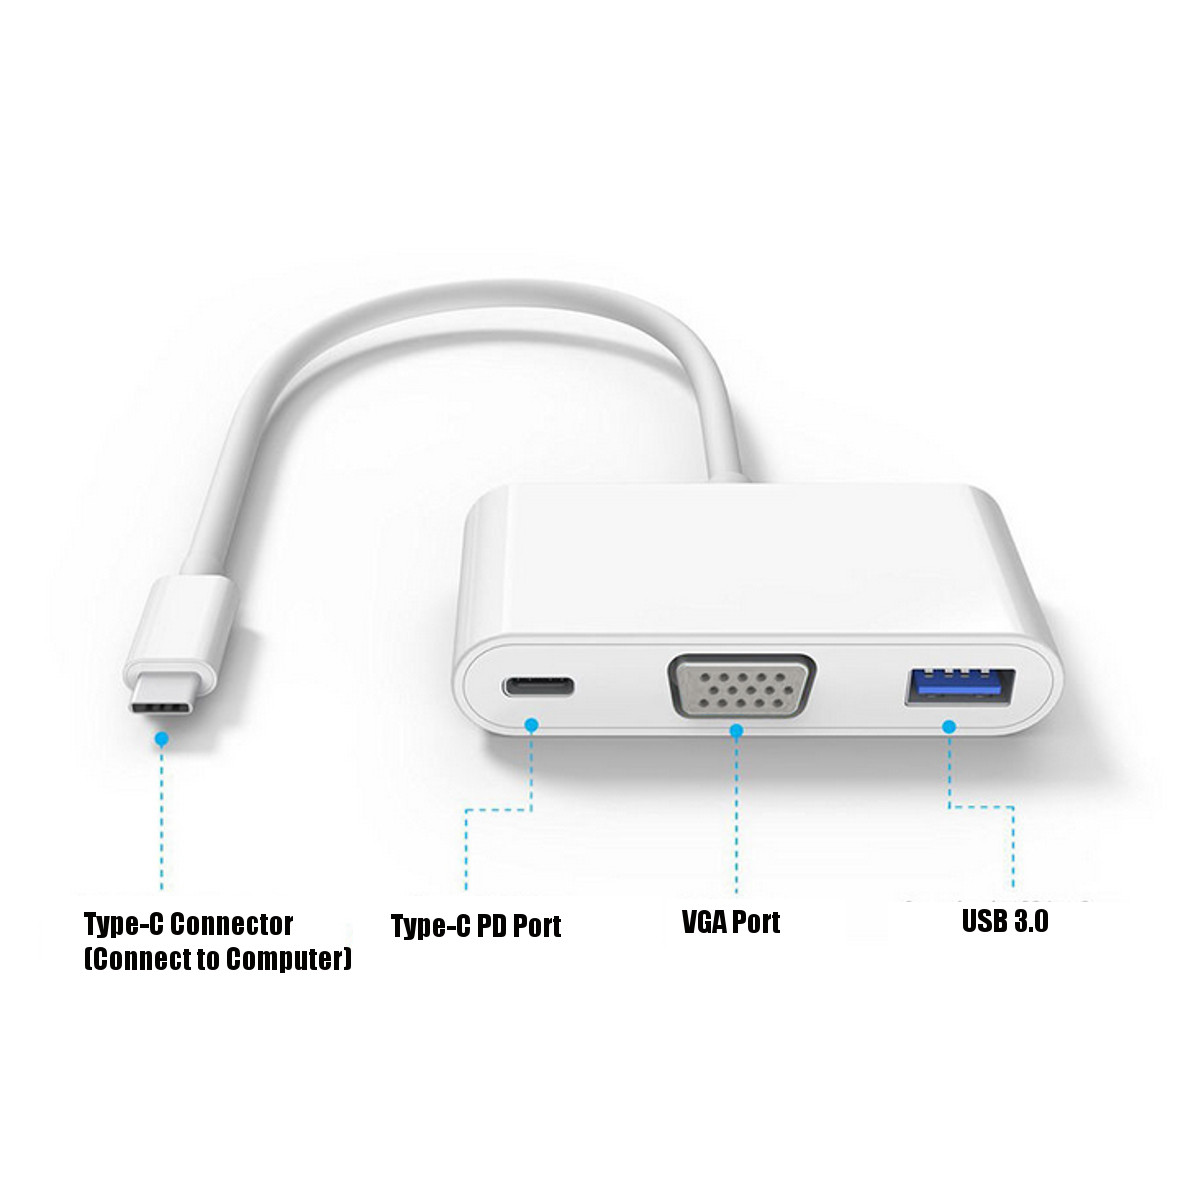 USB 3.1 type C to VGA Converter Monitor USB 3.0 Type C Female Charger Adapter for Macbook